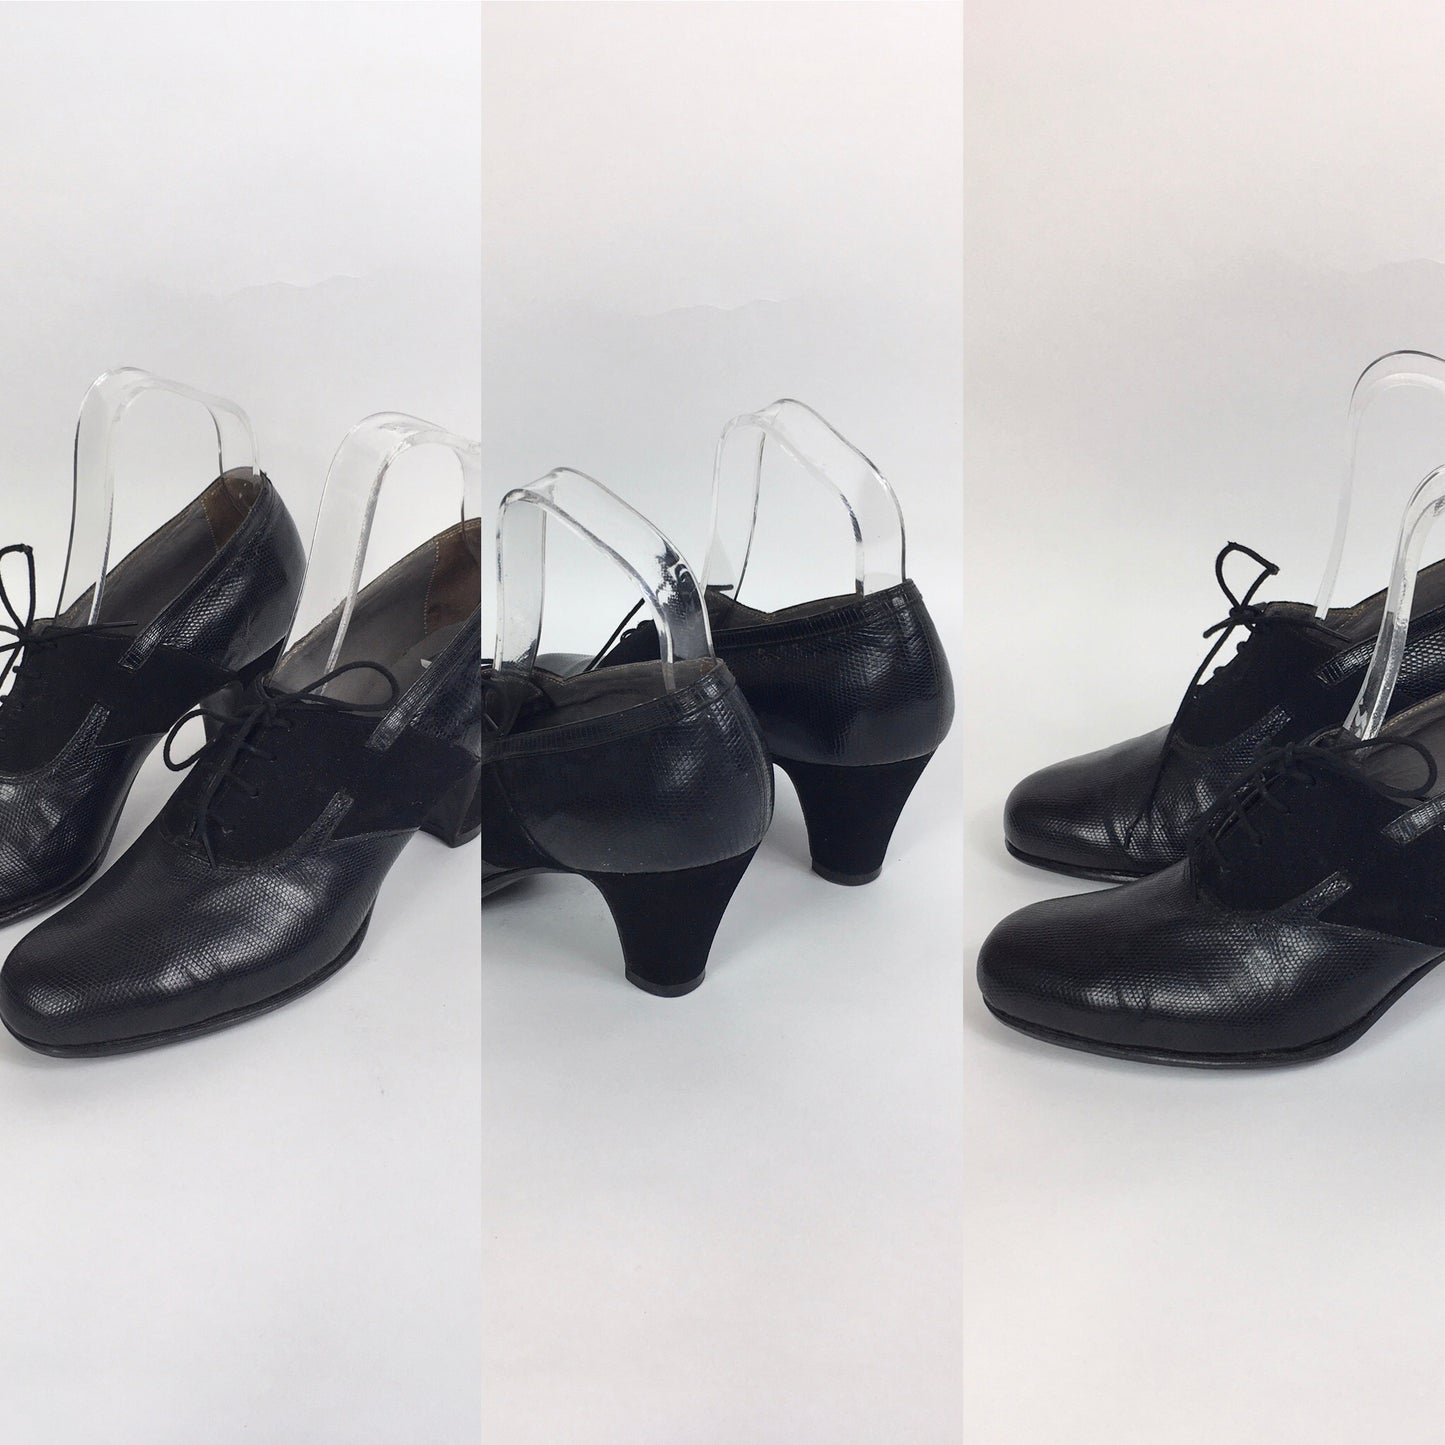 Original 1940’s Black Suede & Leather Heeled Brogues - Stunning Detailing And Shape